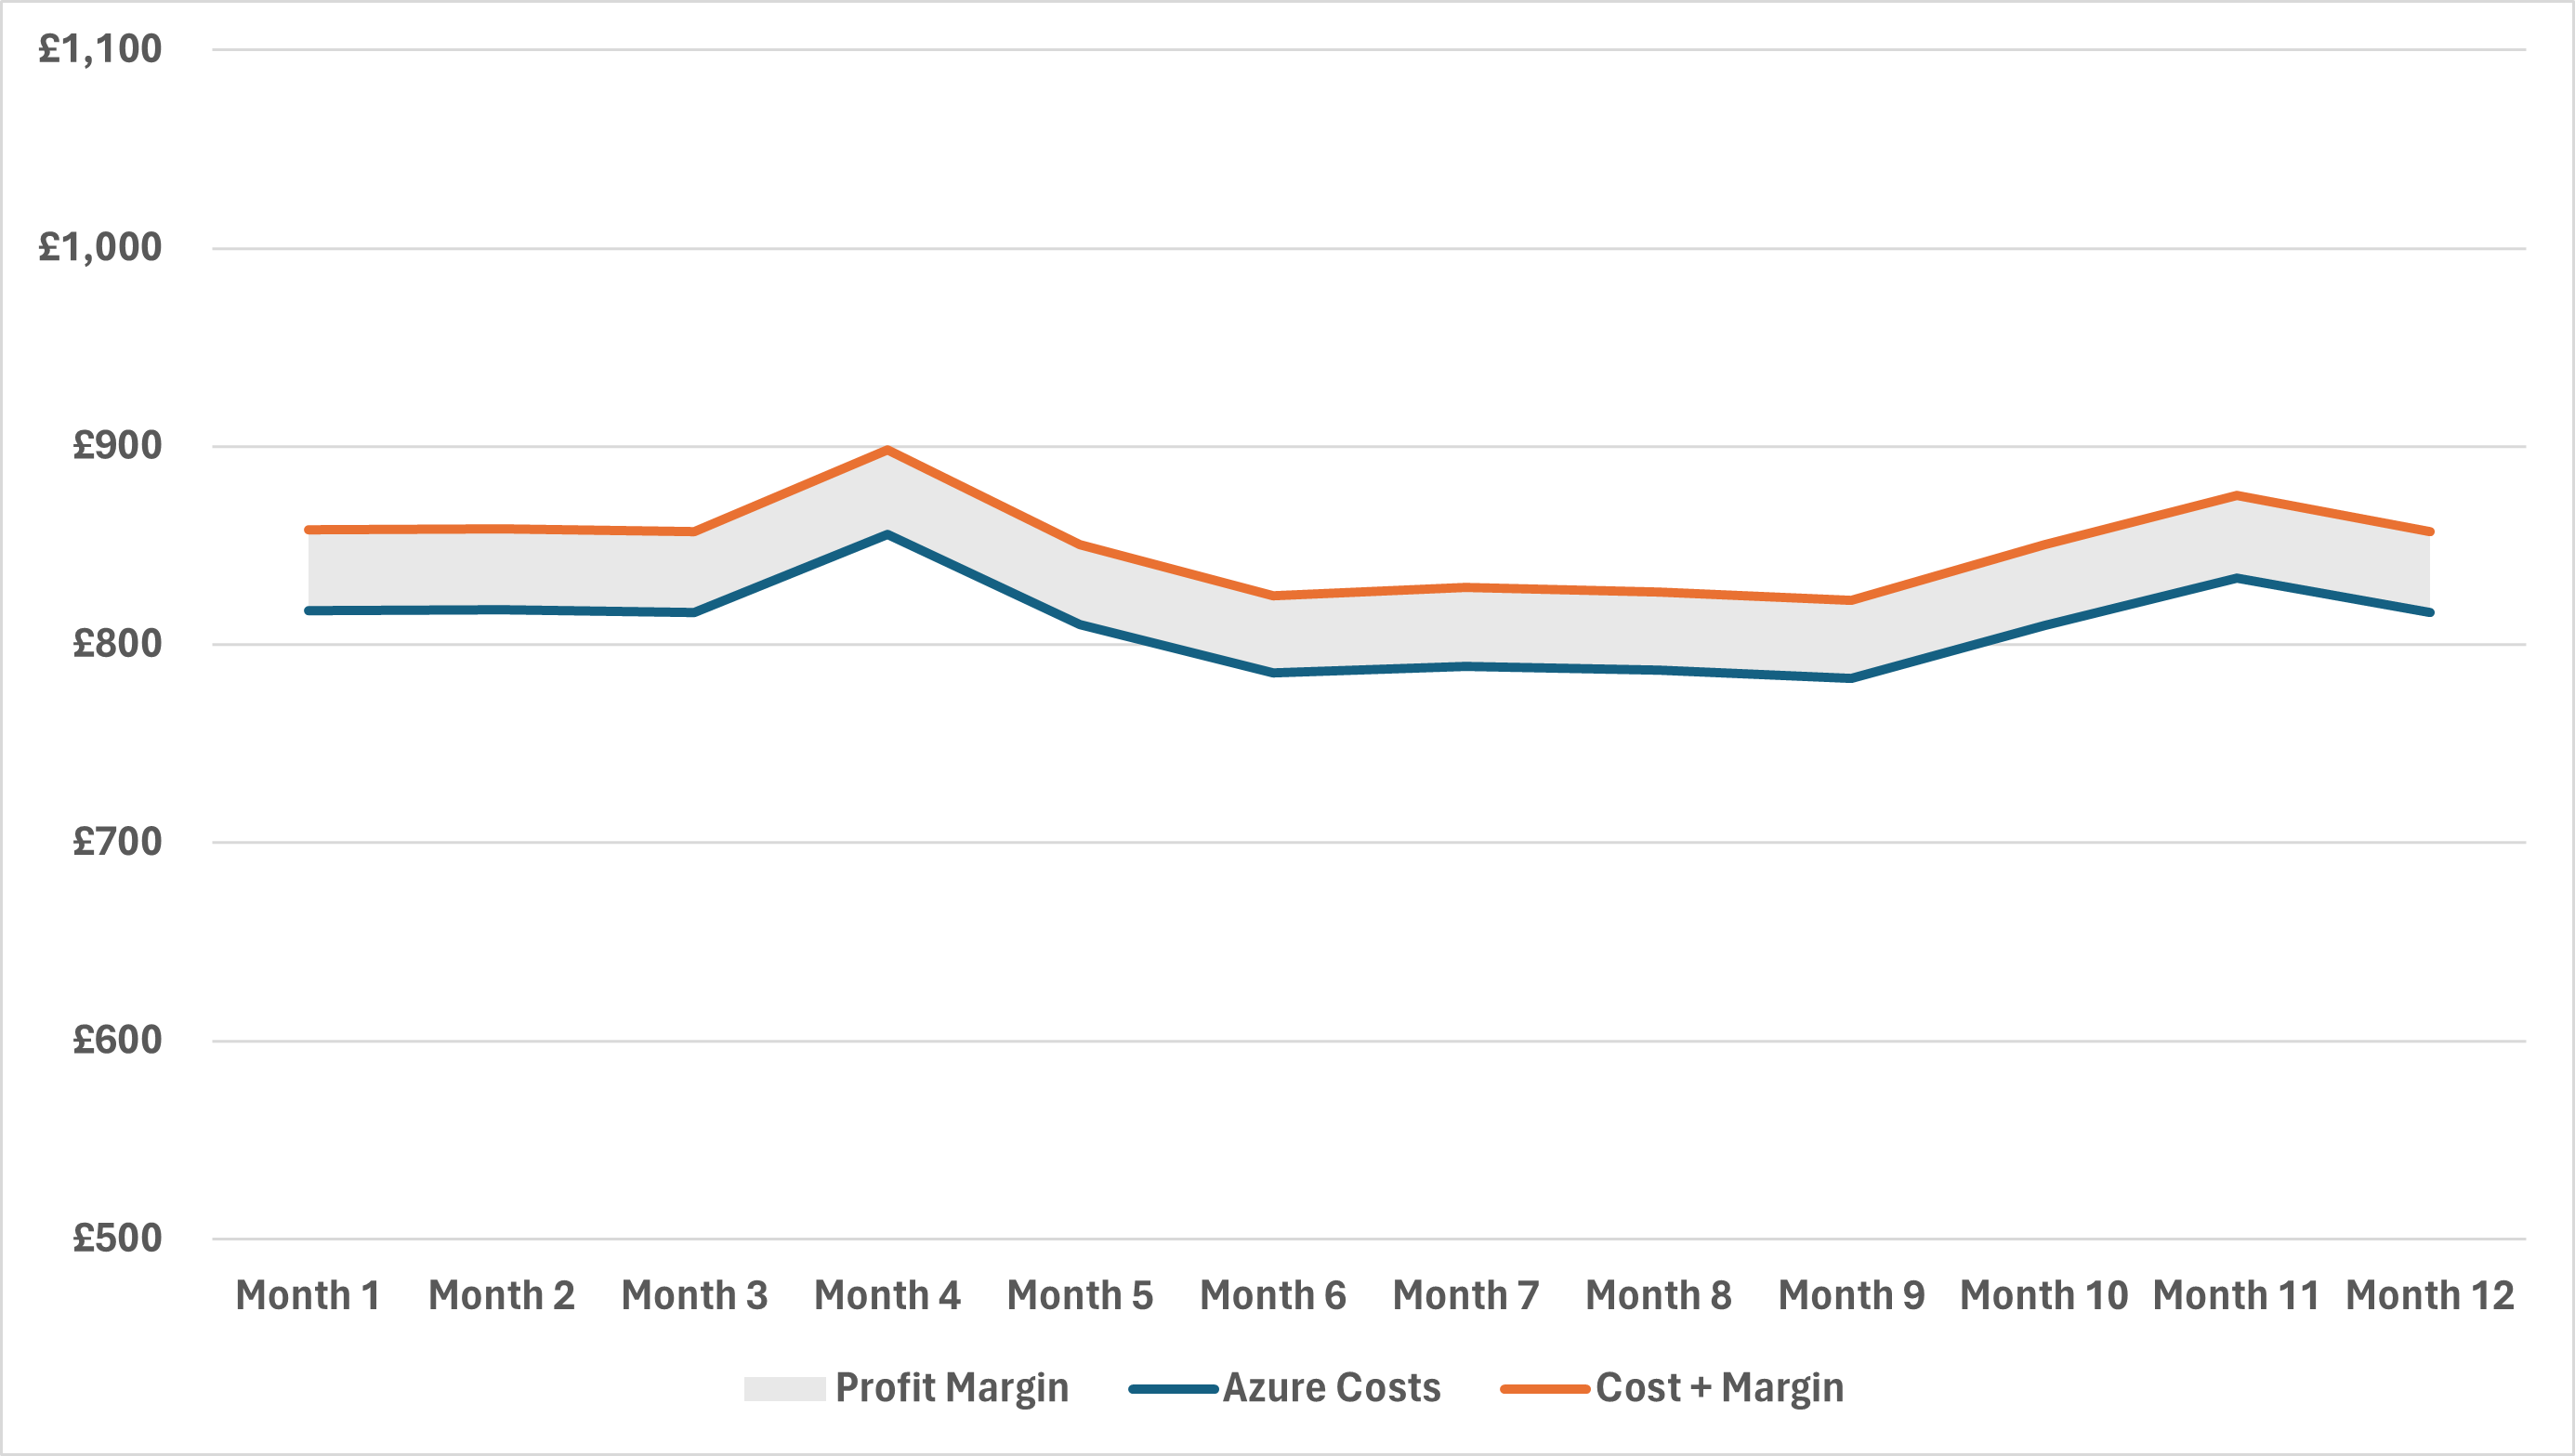 An example chart of an Azure bill over 12 months, showing the fluctuation in profitability over time.